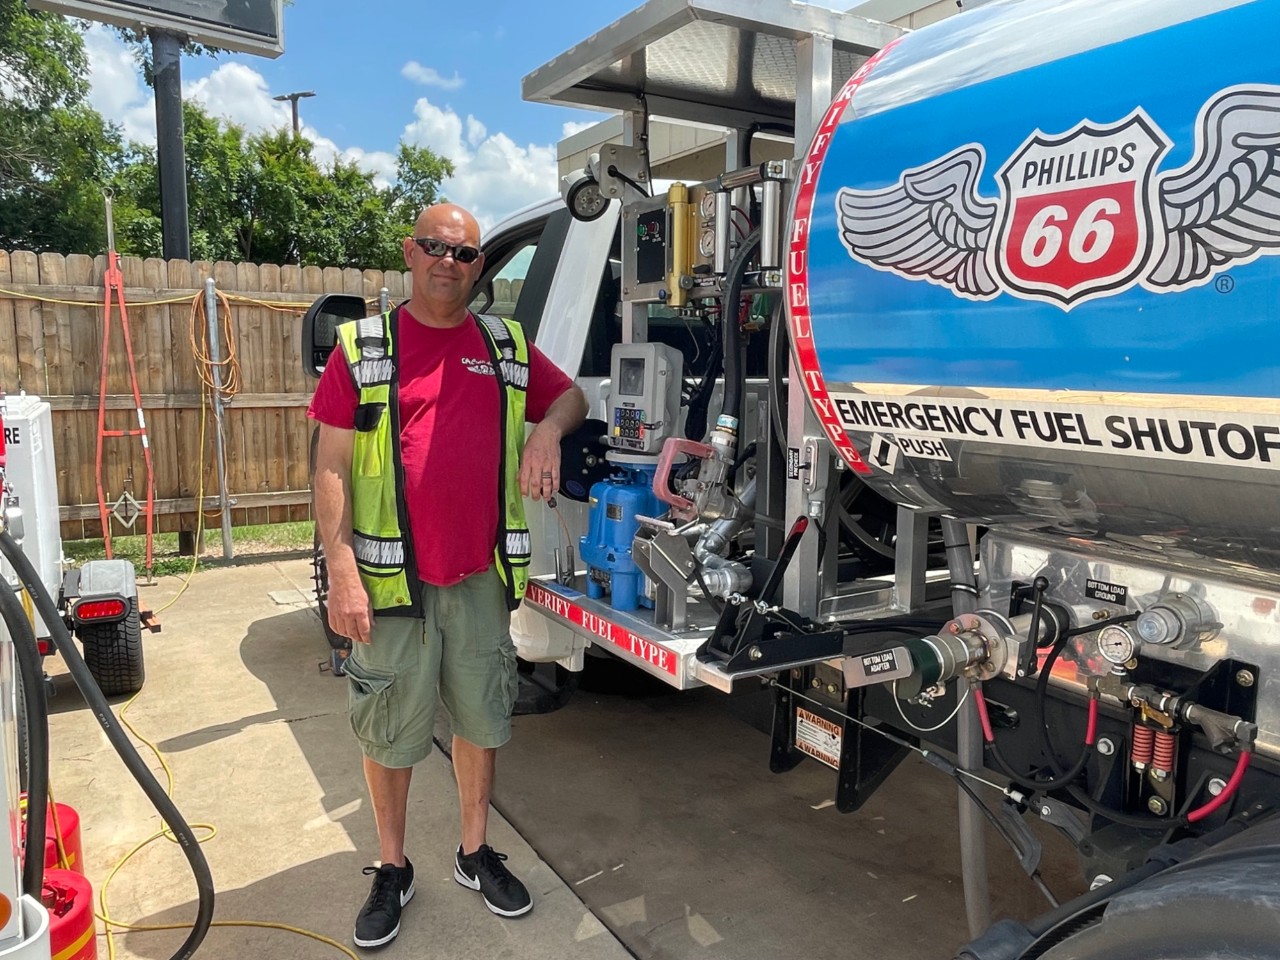 Cruise Aviation Lineman standing next to the Phillips 66 fuel truck operated by Cruise Aviation.